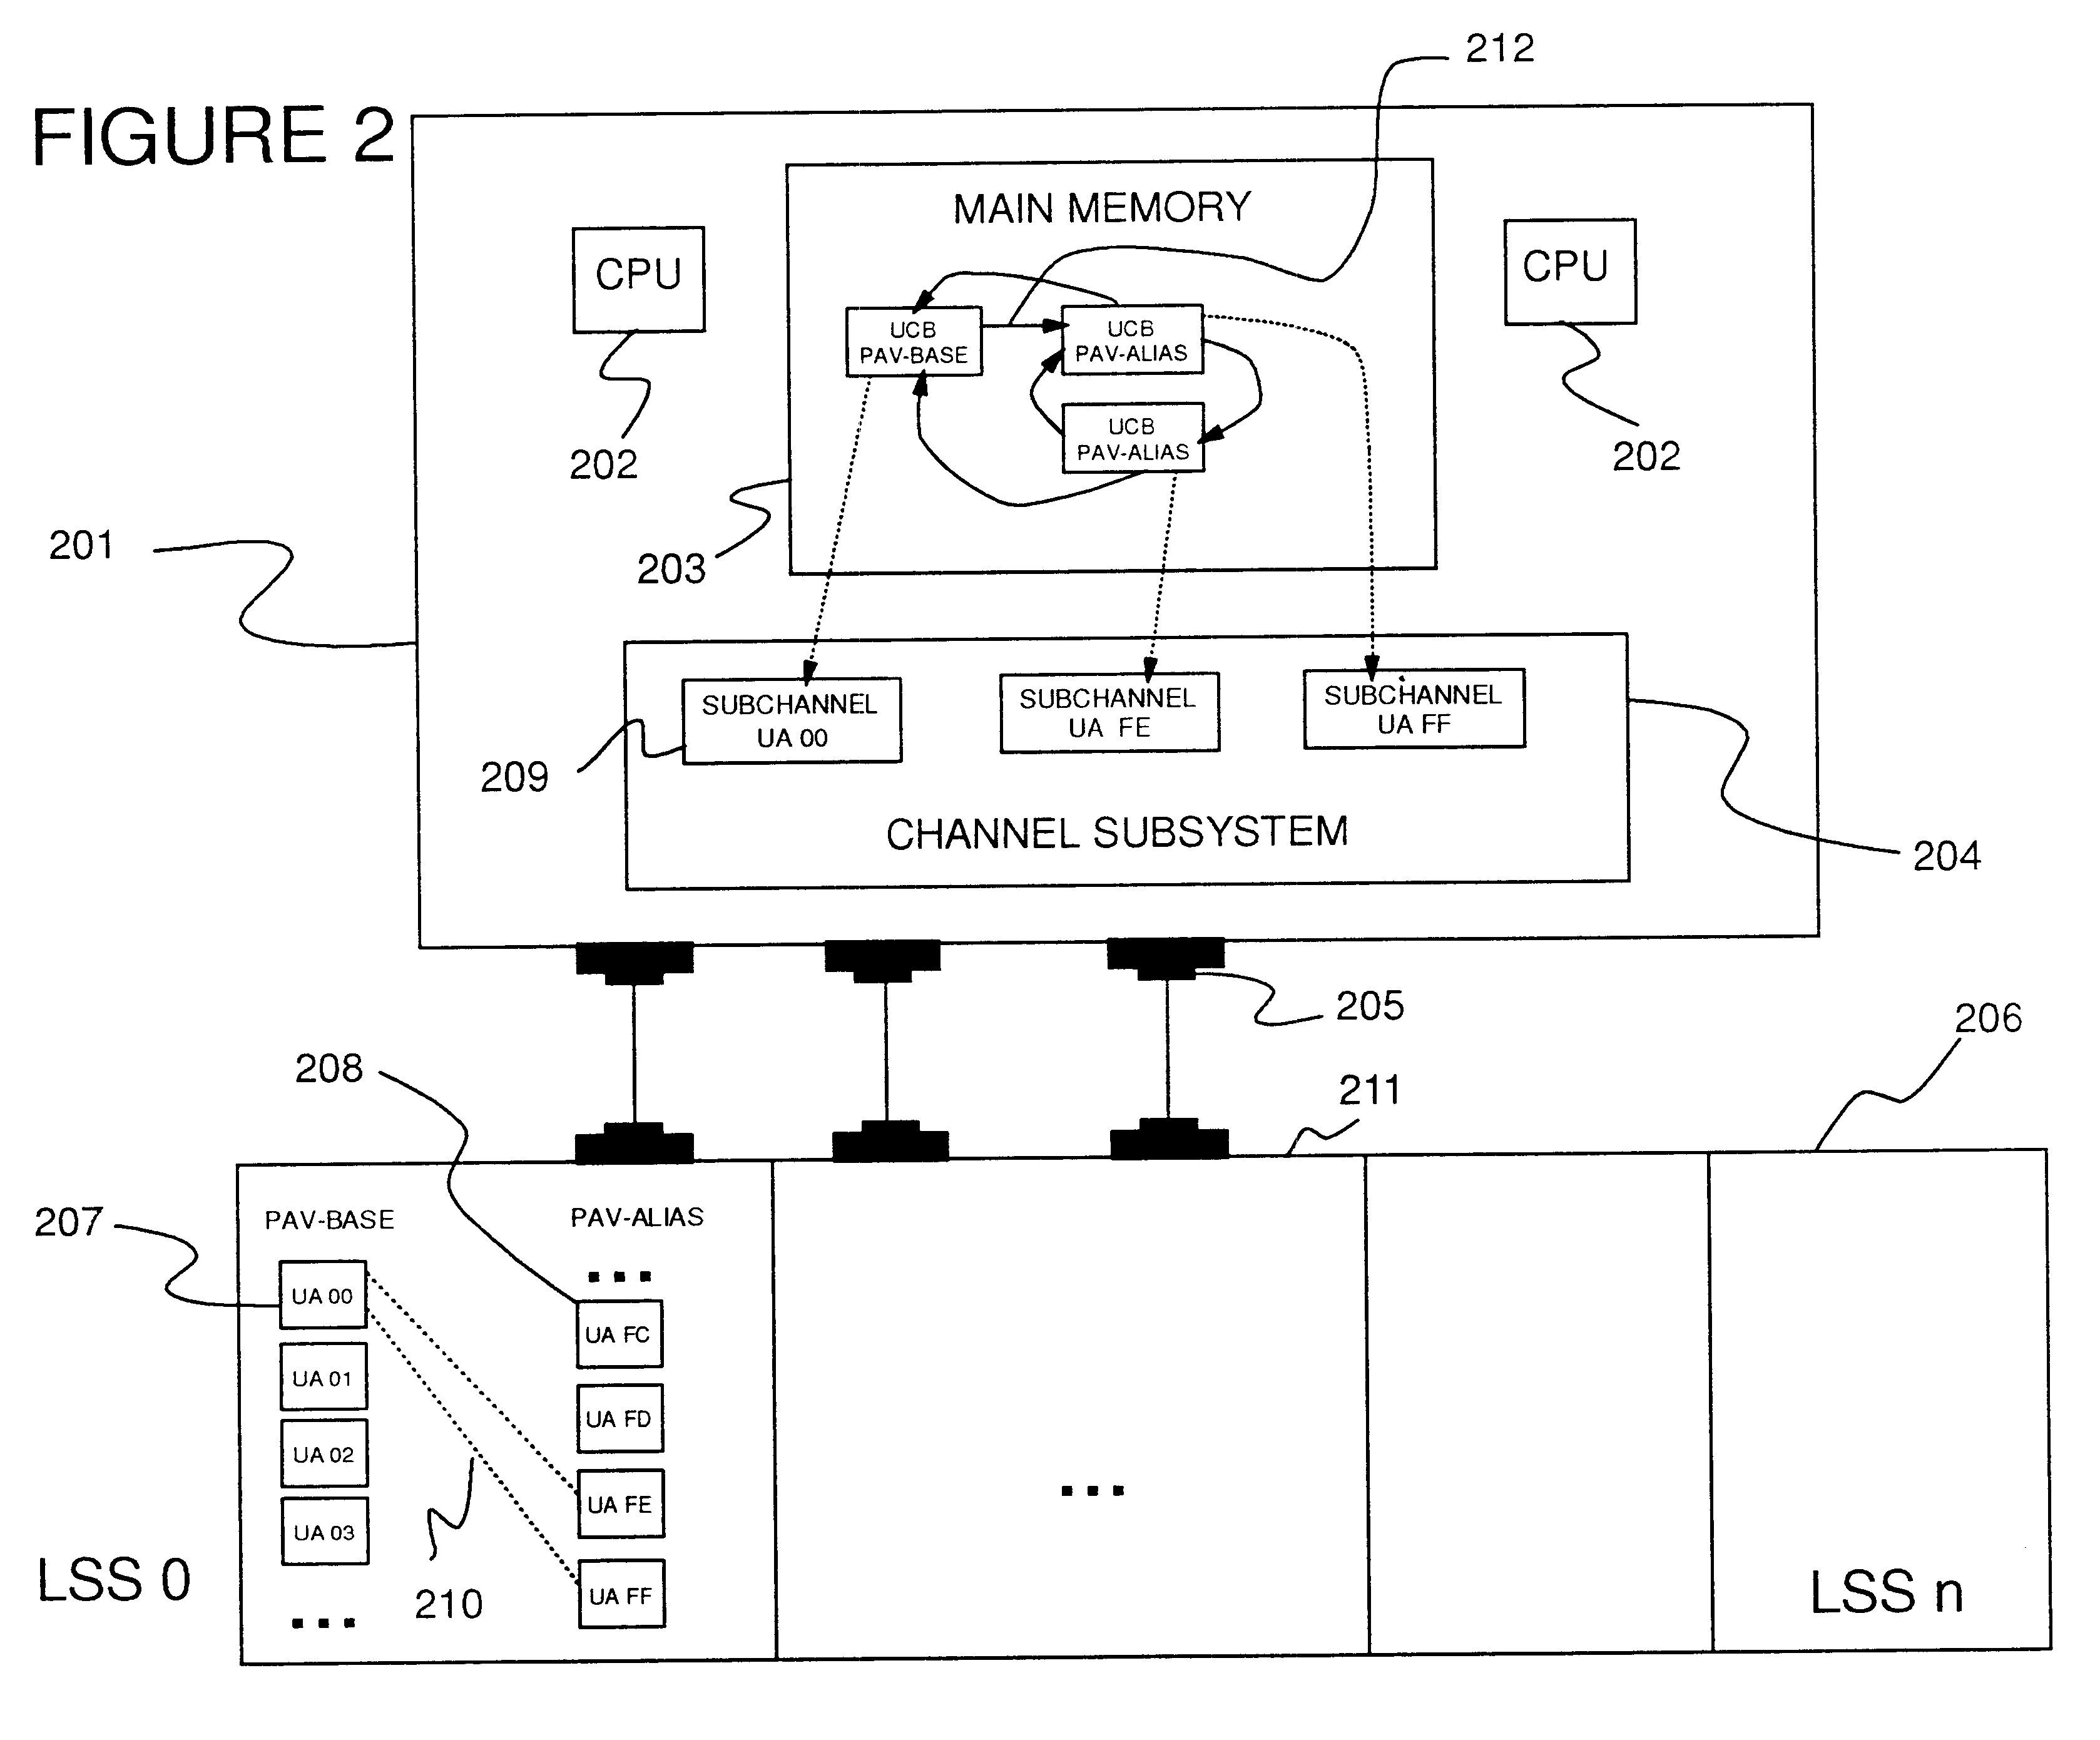 Dynamic management of addresses to an input/output (I/O) device